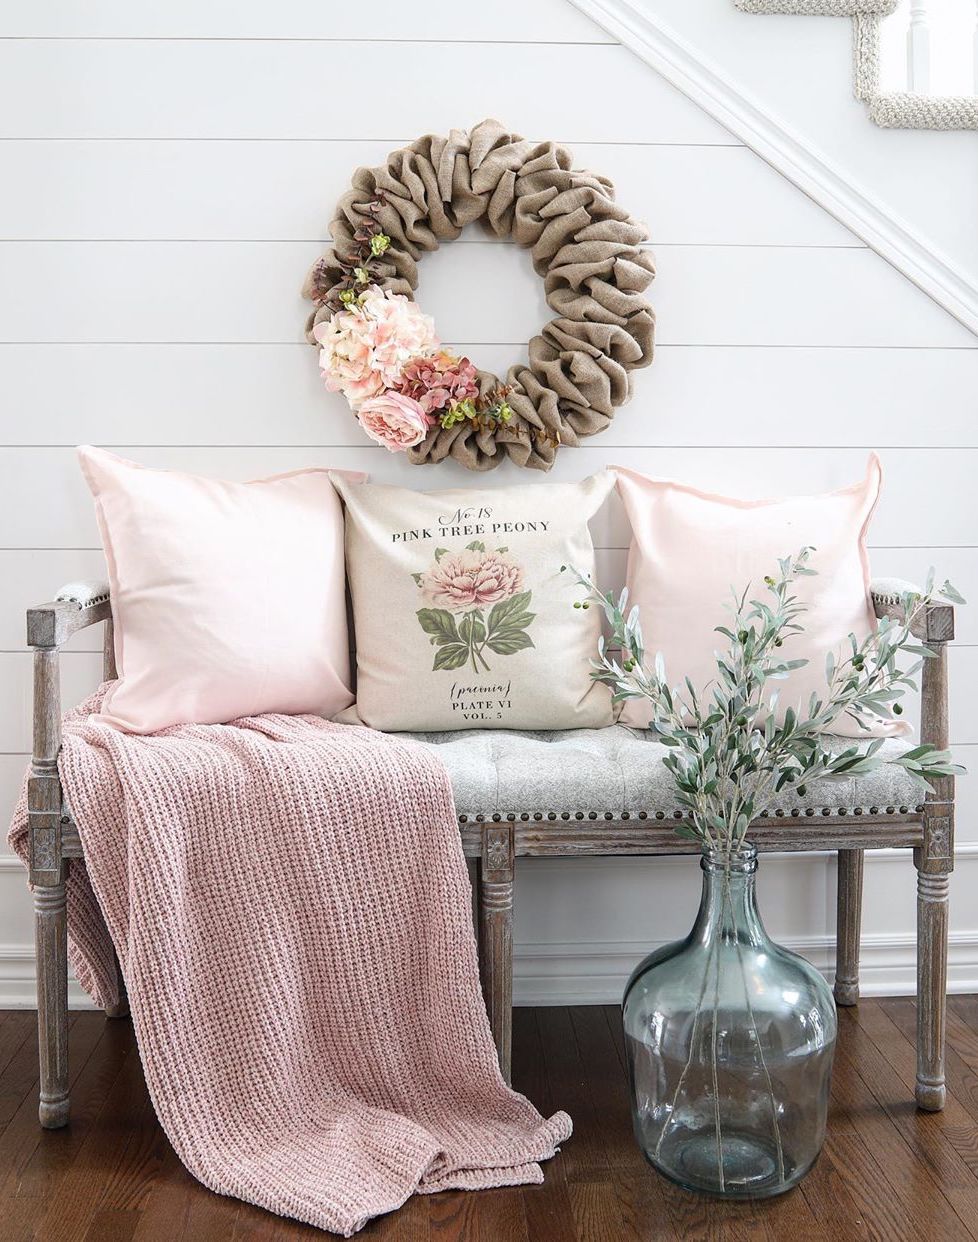 Spring Home Decorations at the Entryway via @willowbloomhome